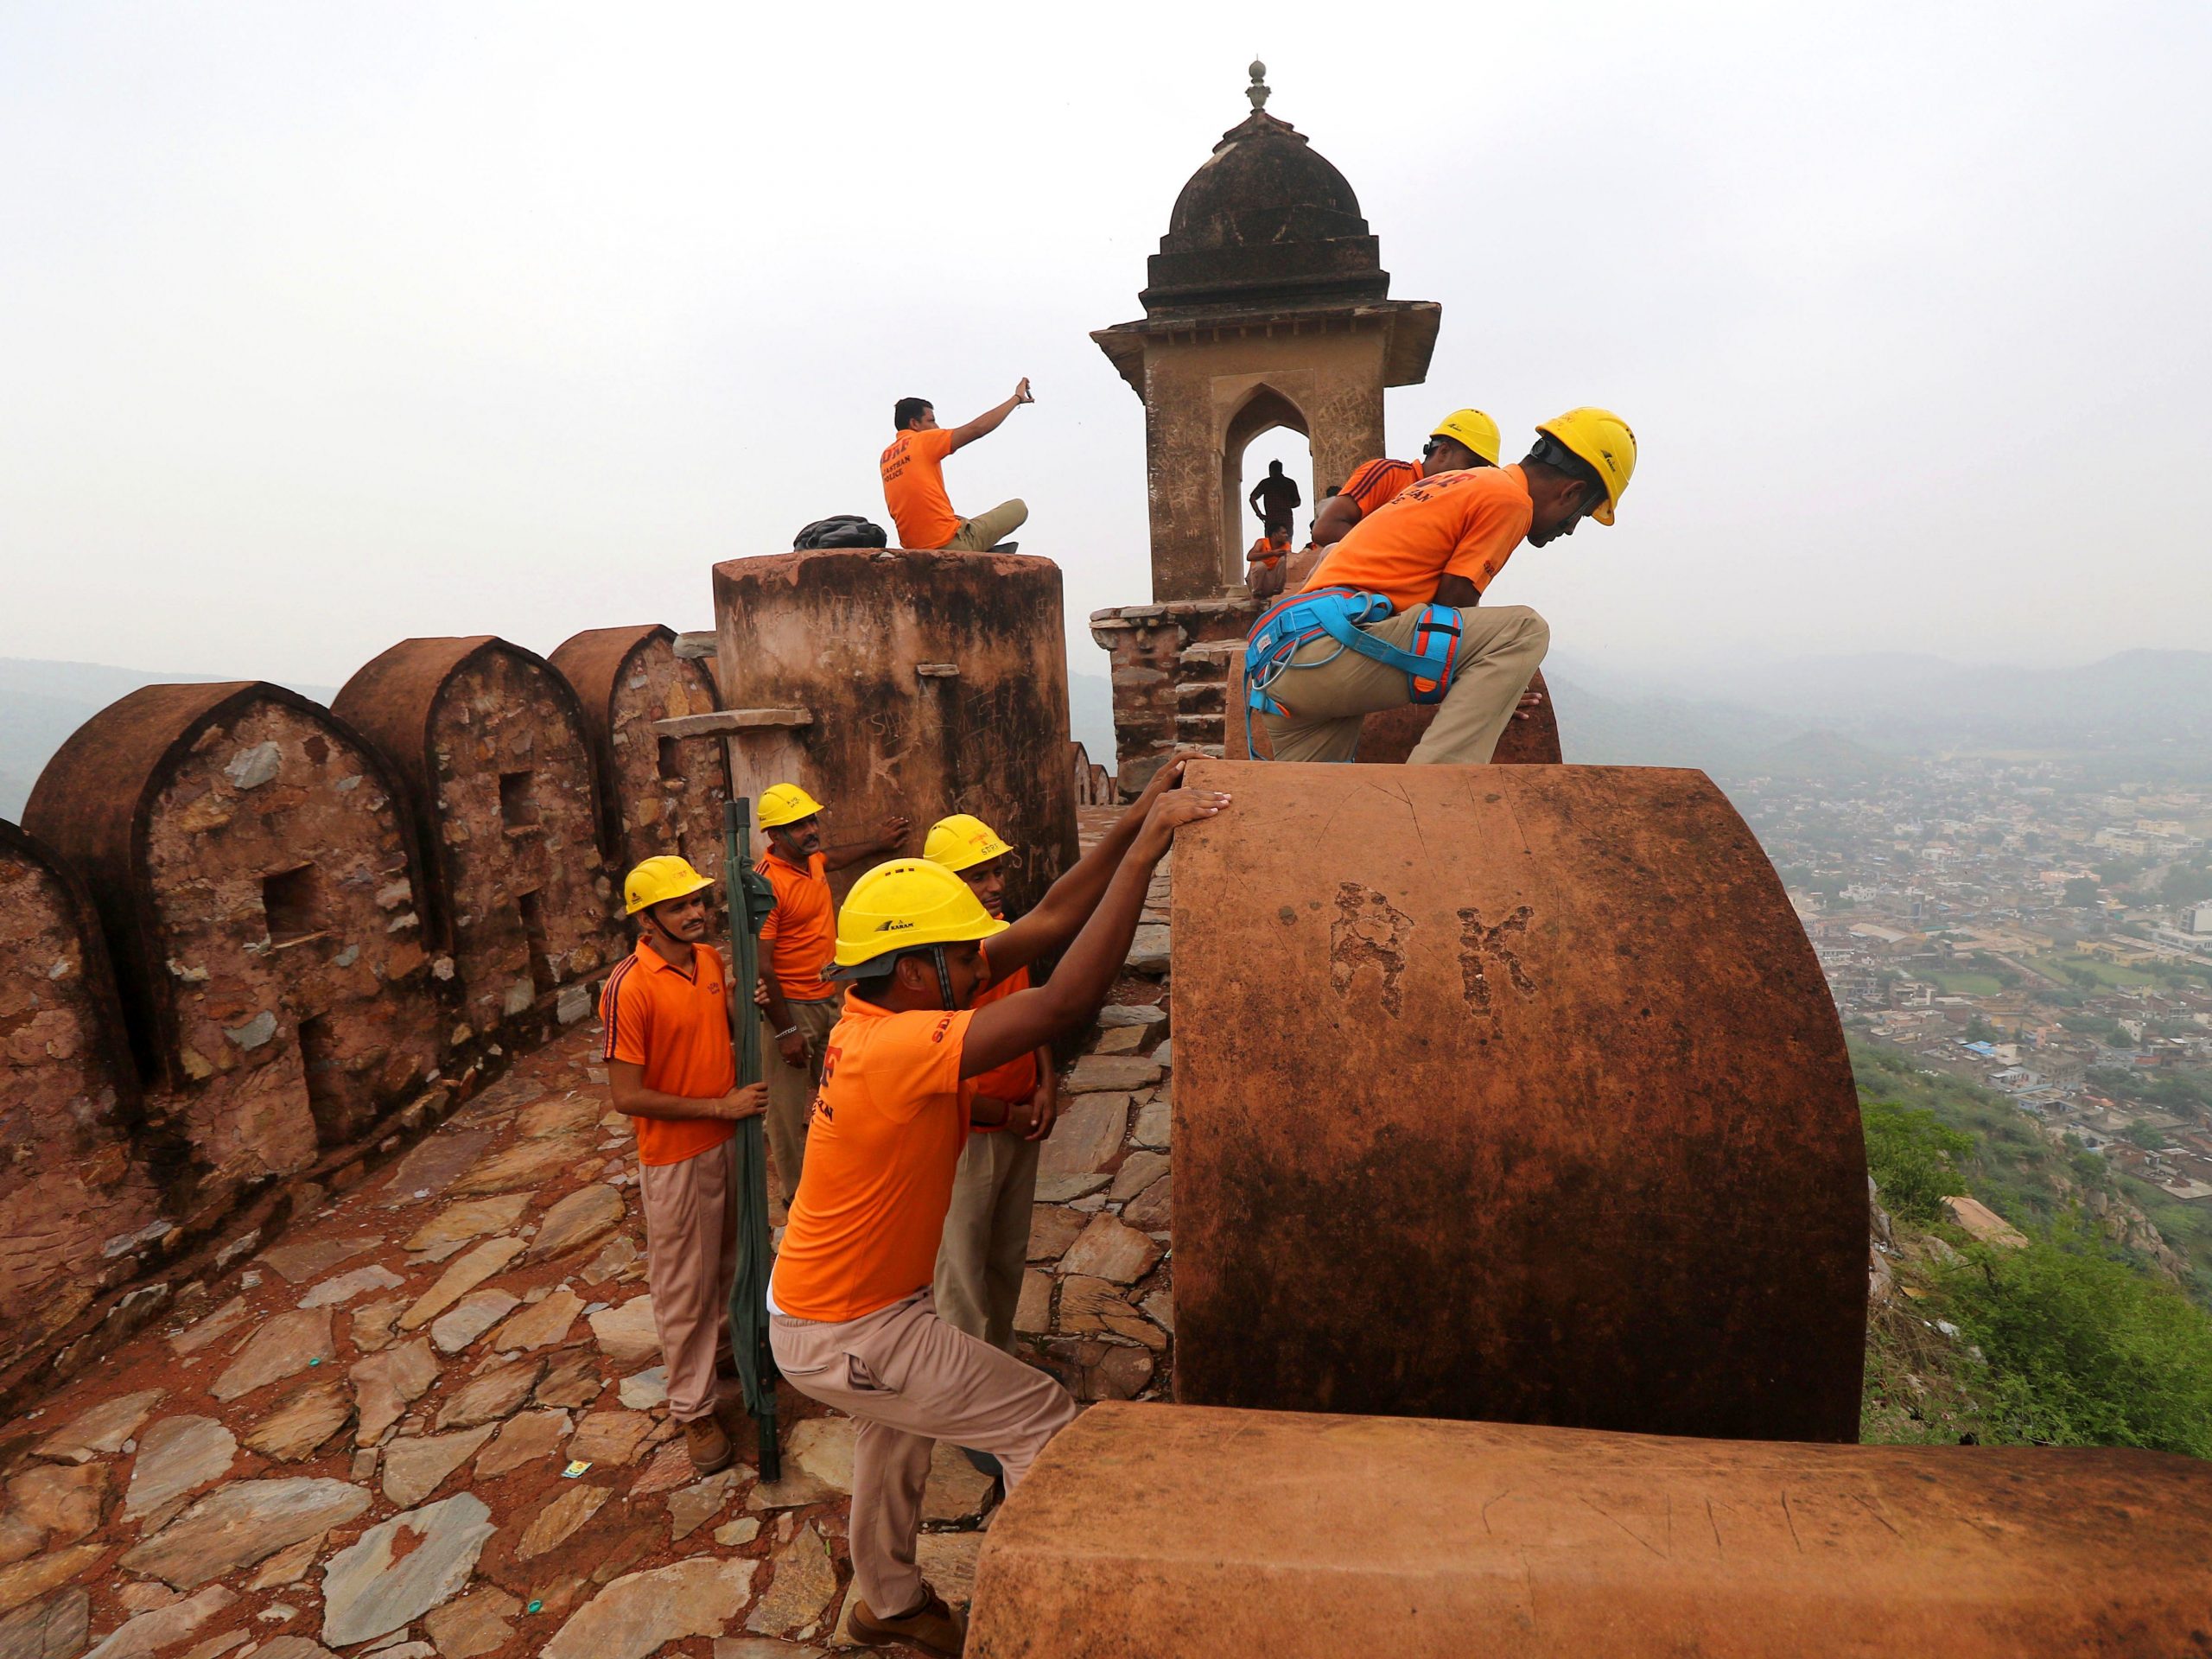 State Disaster Response personnel perform a search operation at a watchtower of the 12th century Amber Fort where 11 people were killed Sunday after being struck by lightning in Jaipur, Rajasthan state, India